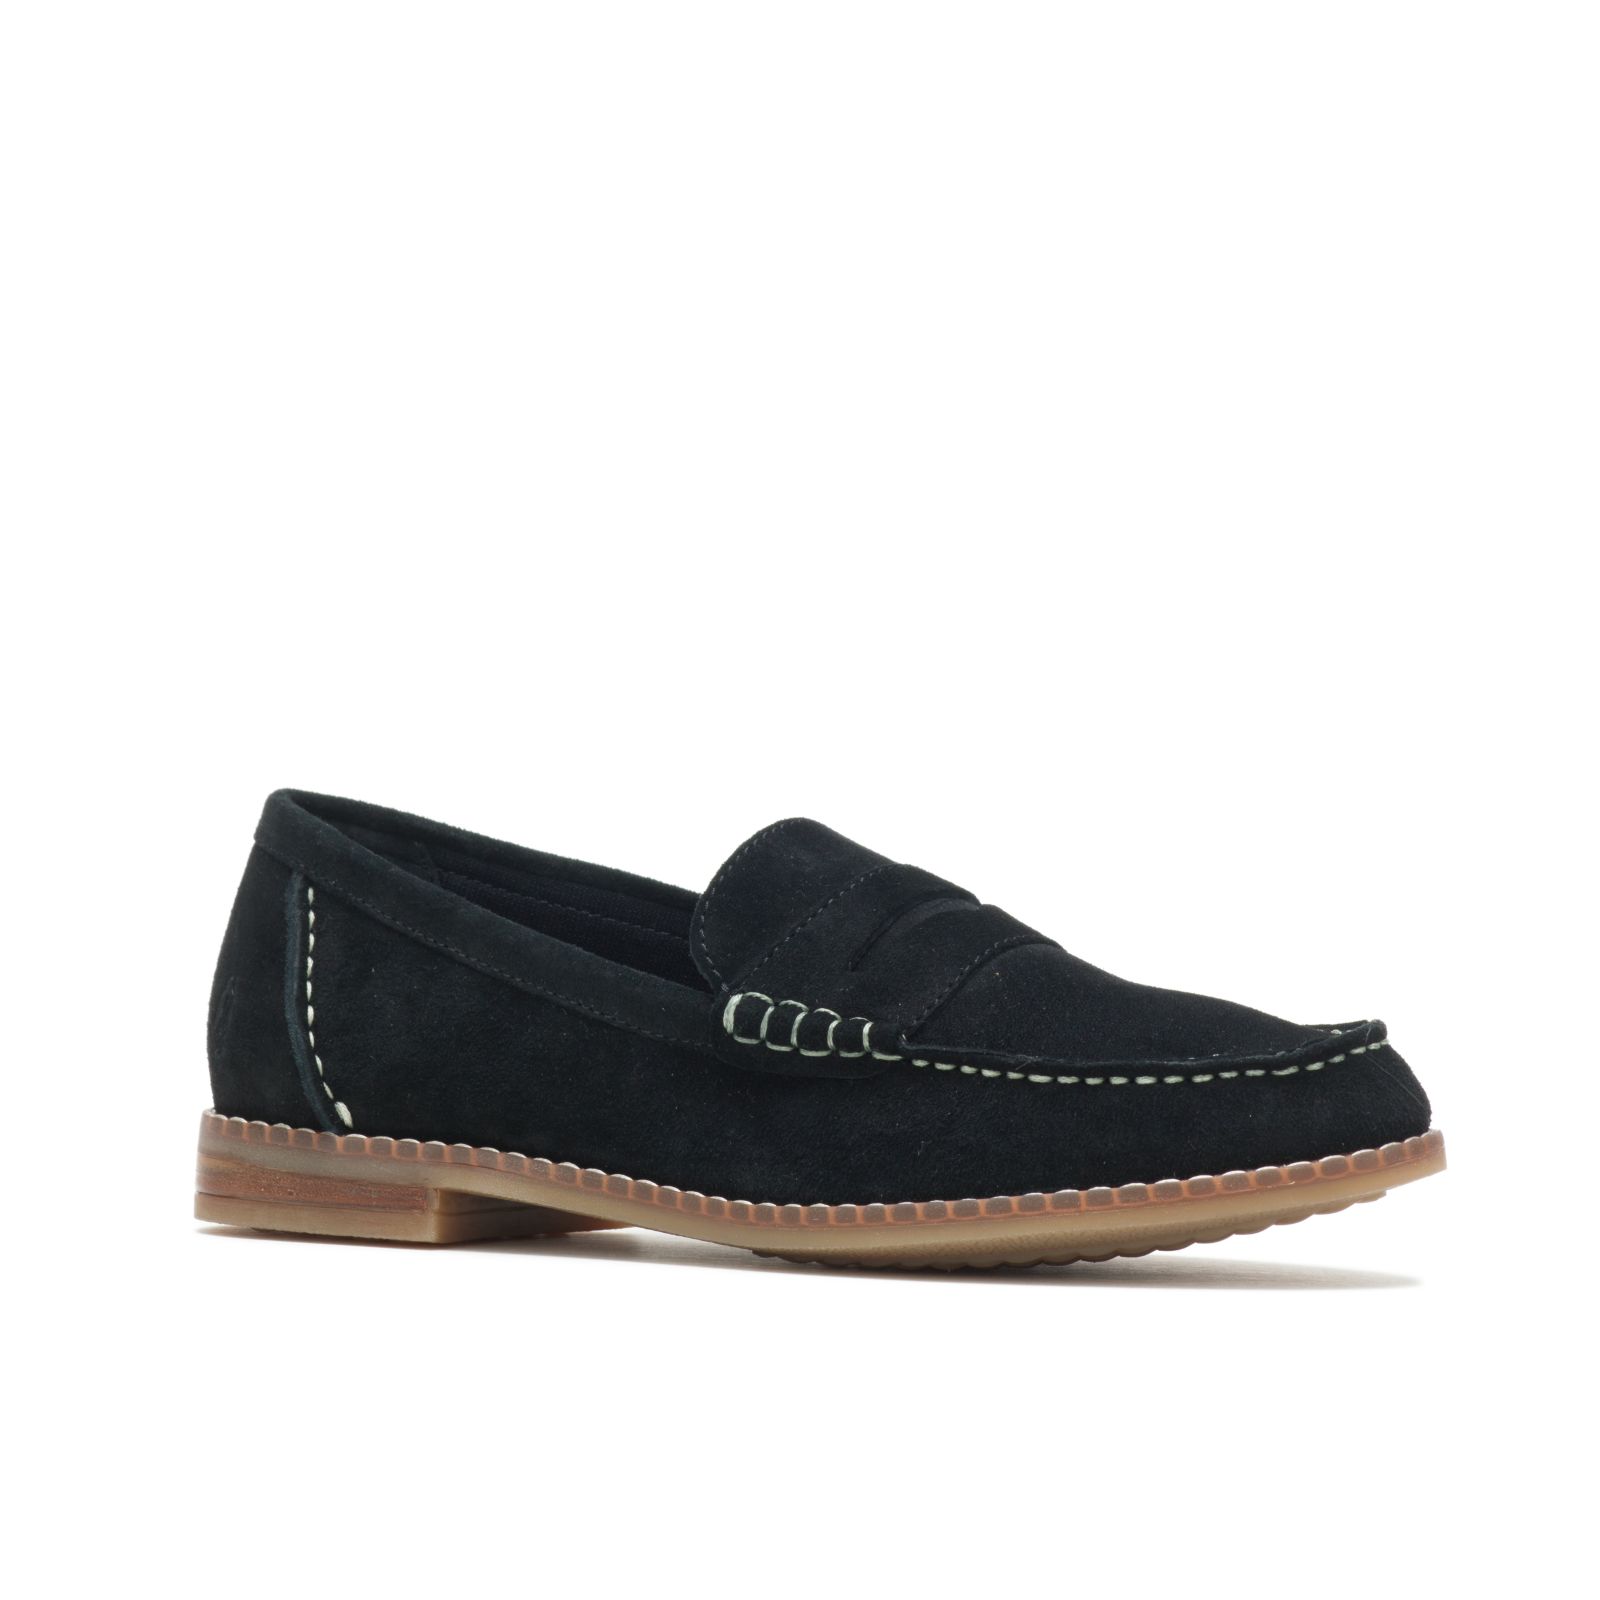 Loafers Hush Puppies Wren Mujer Negros | XEZSKNP-04